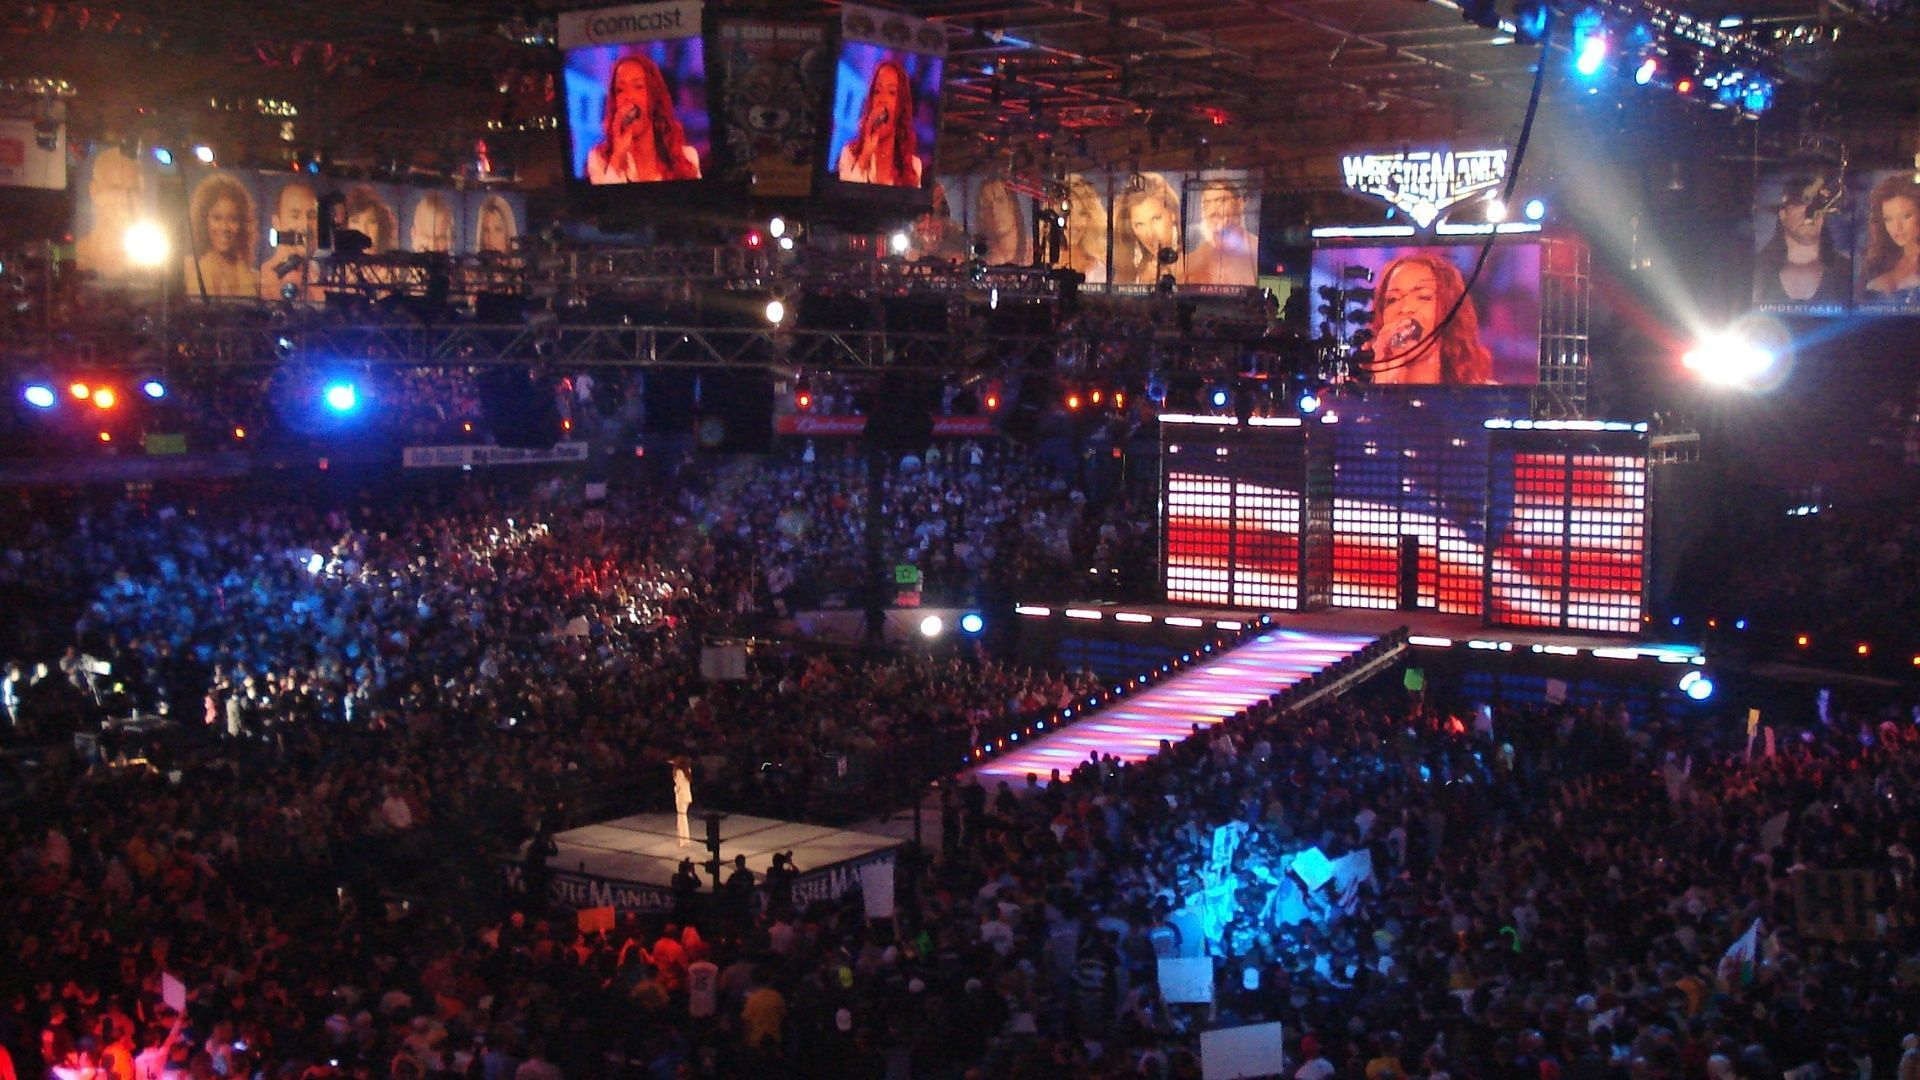 WrestleMania 22 was held at the All-State Arena in Rosemont, Illinois.